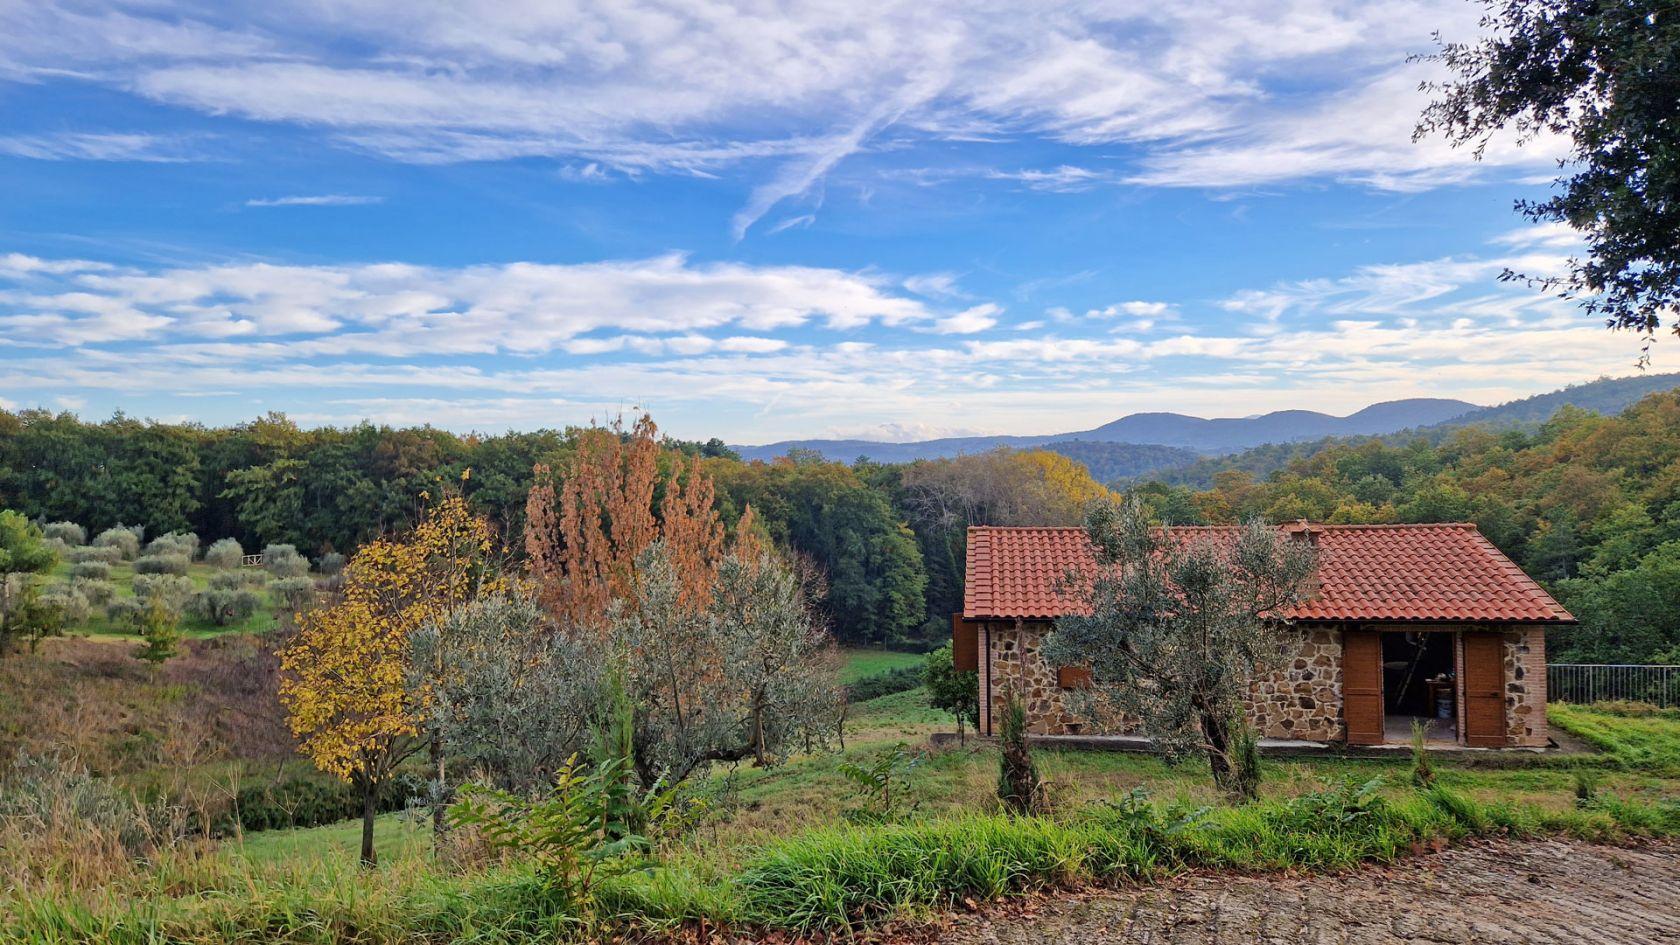 Toscana Immobiliare - Farmhouse with garden, wood and olive grove for sale in a panoramic area in the province of Siena